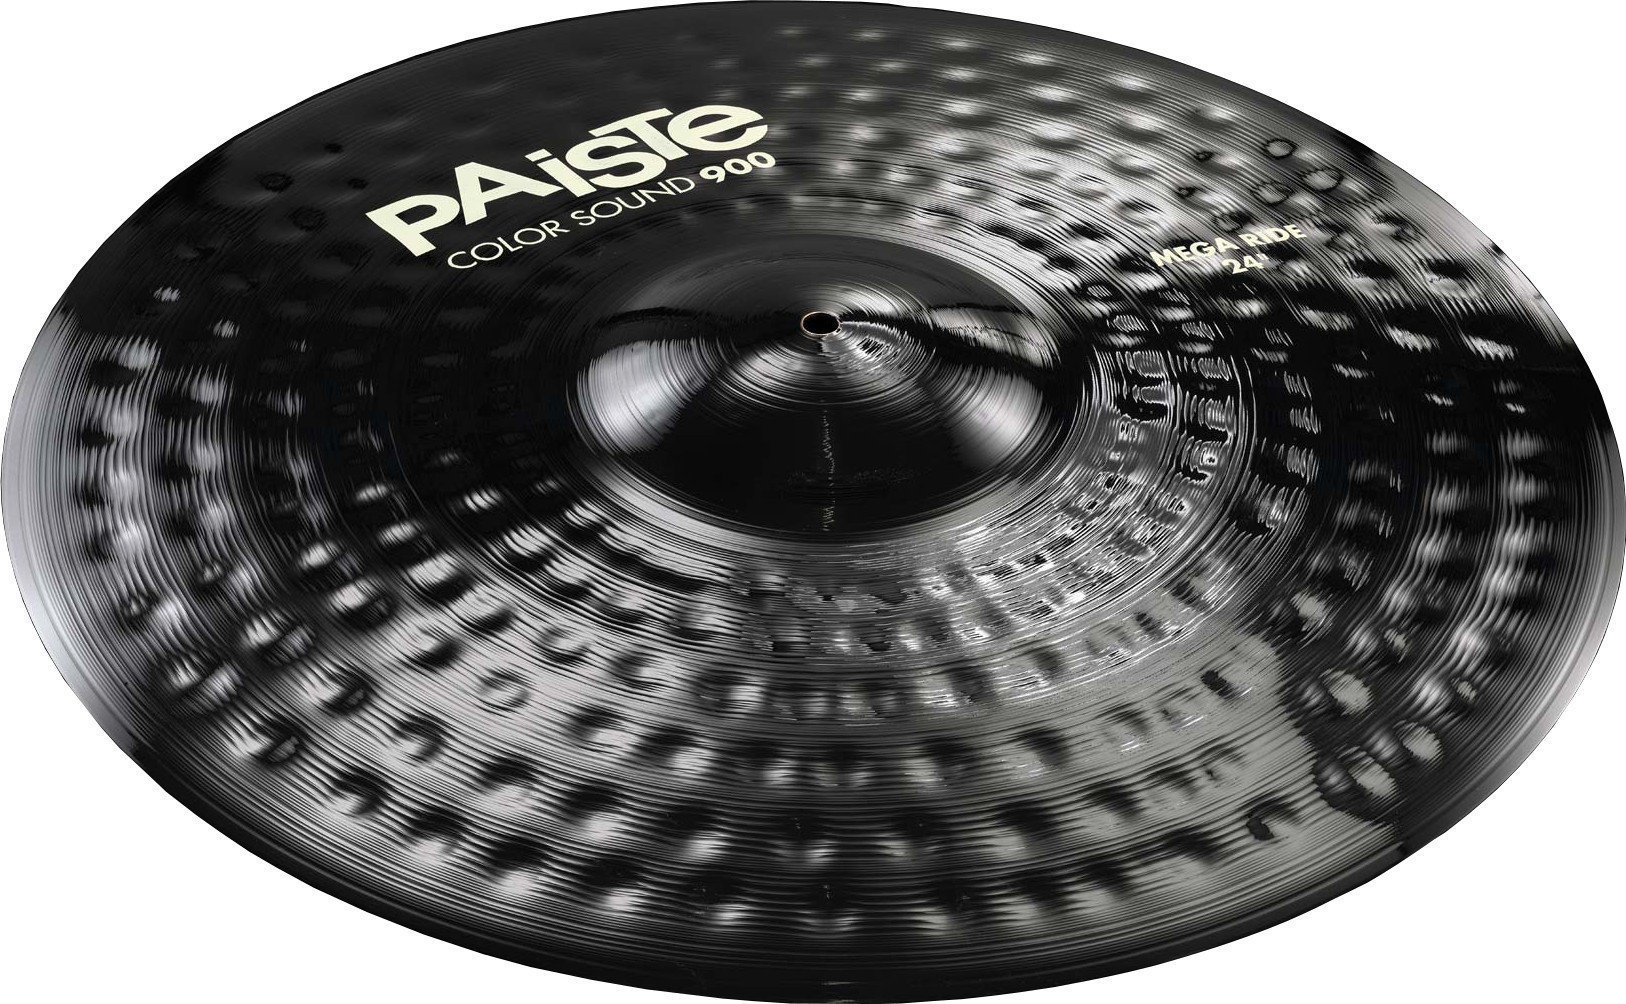 Ride Cymbal Paiste Color Sound 900  Mega Ride Cymbal 24" Sort